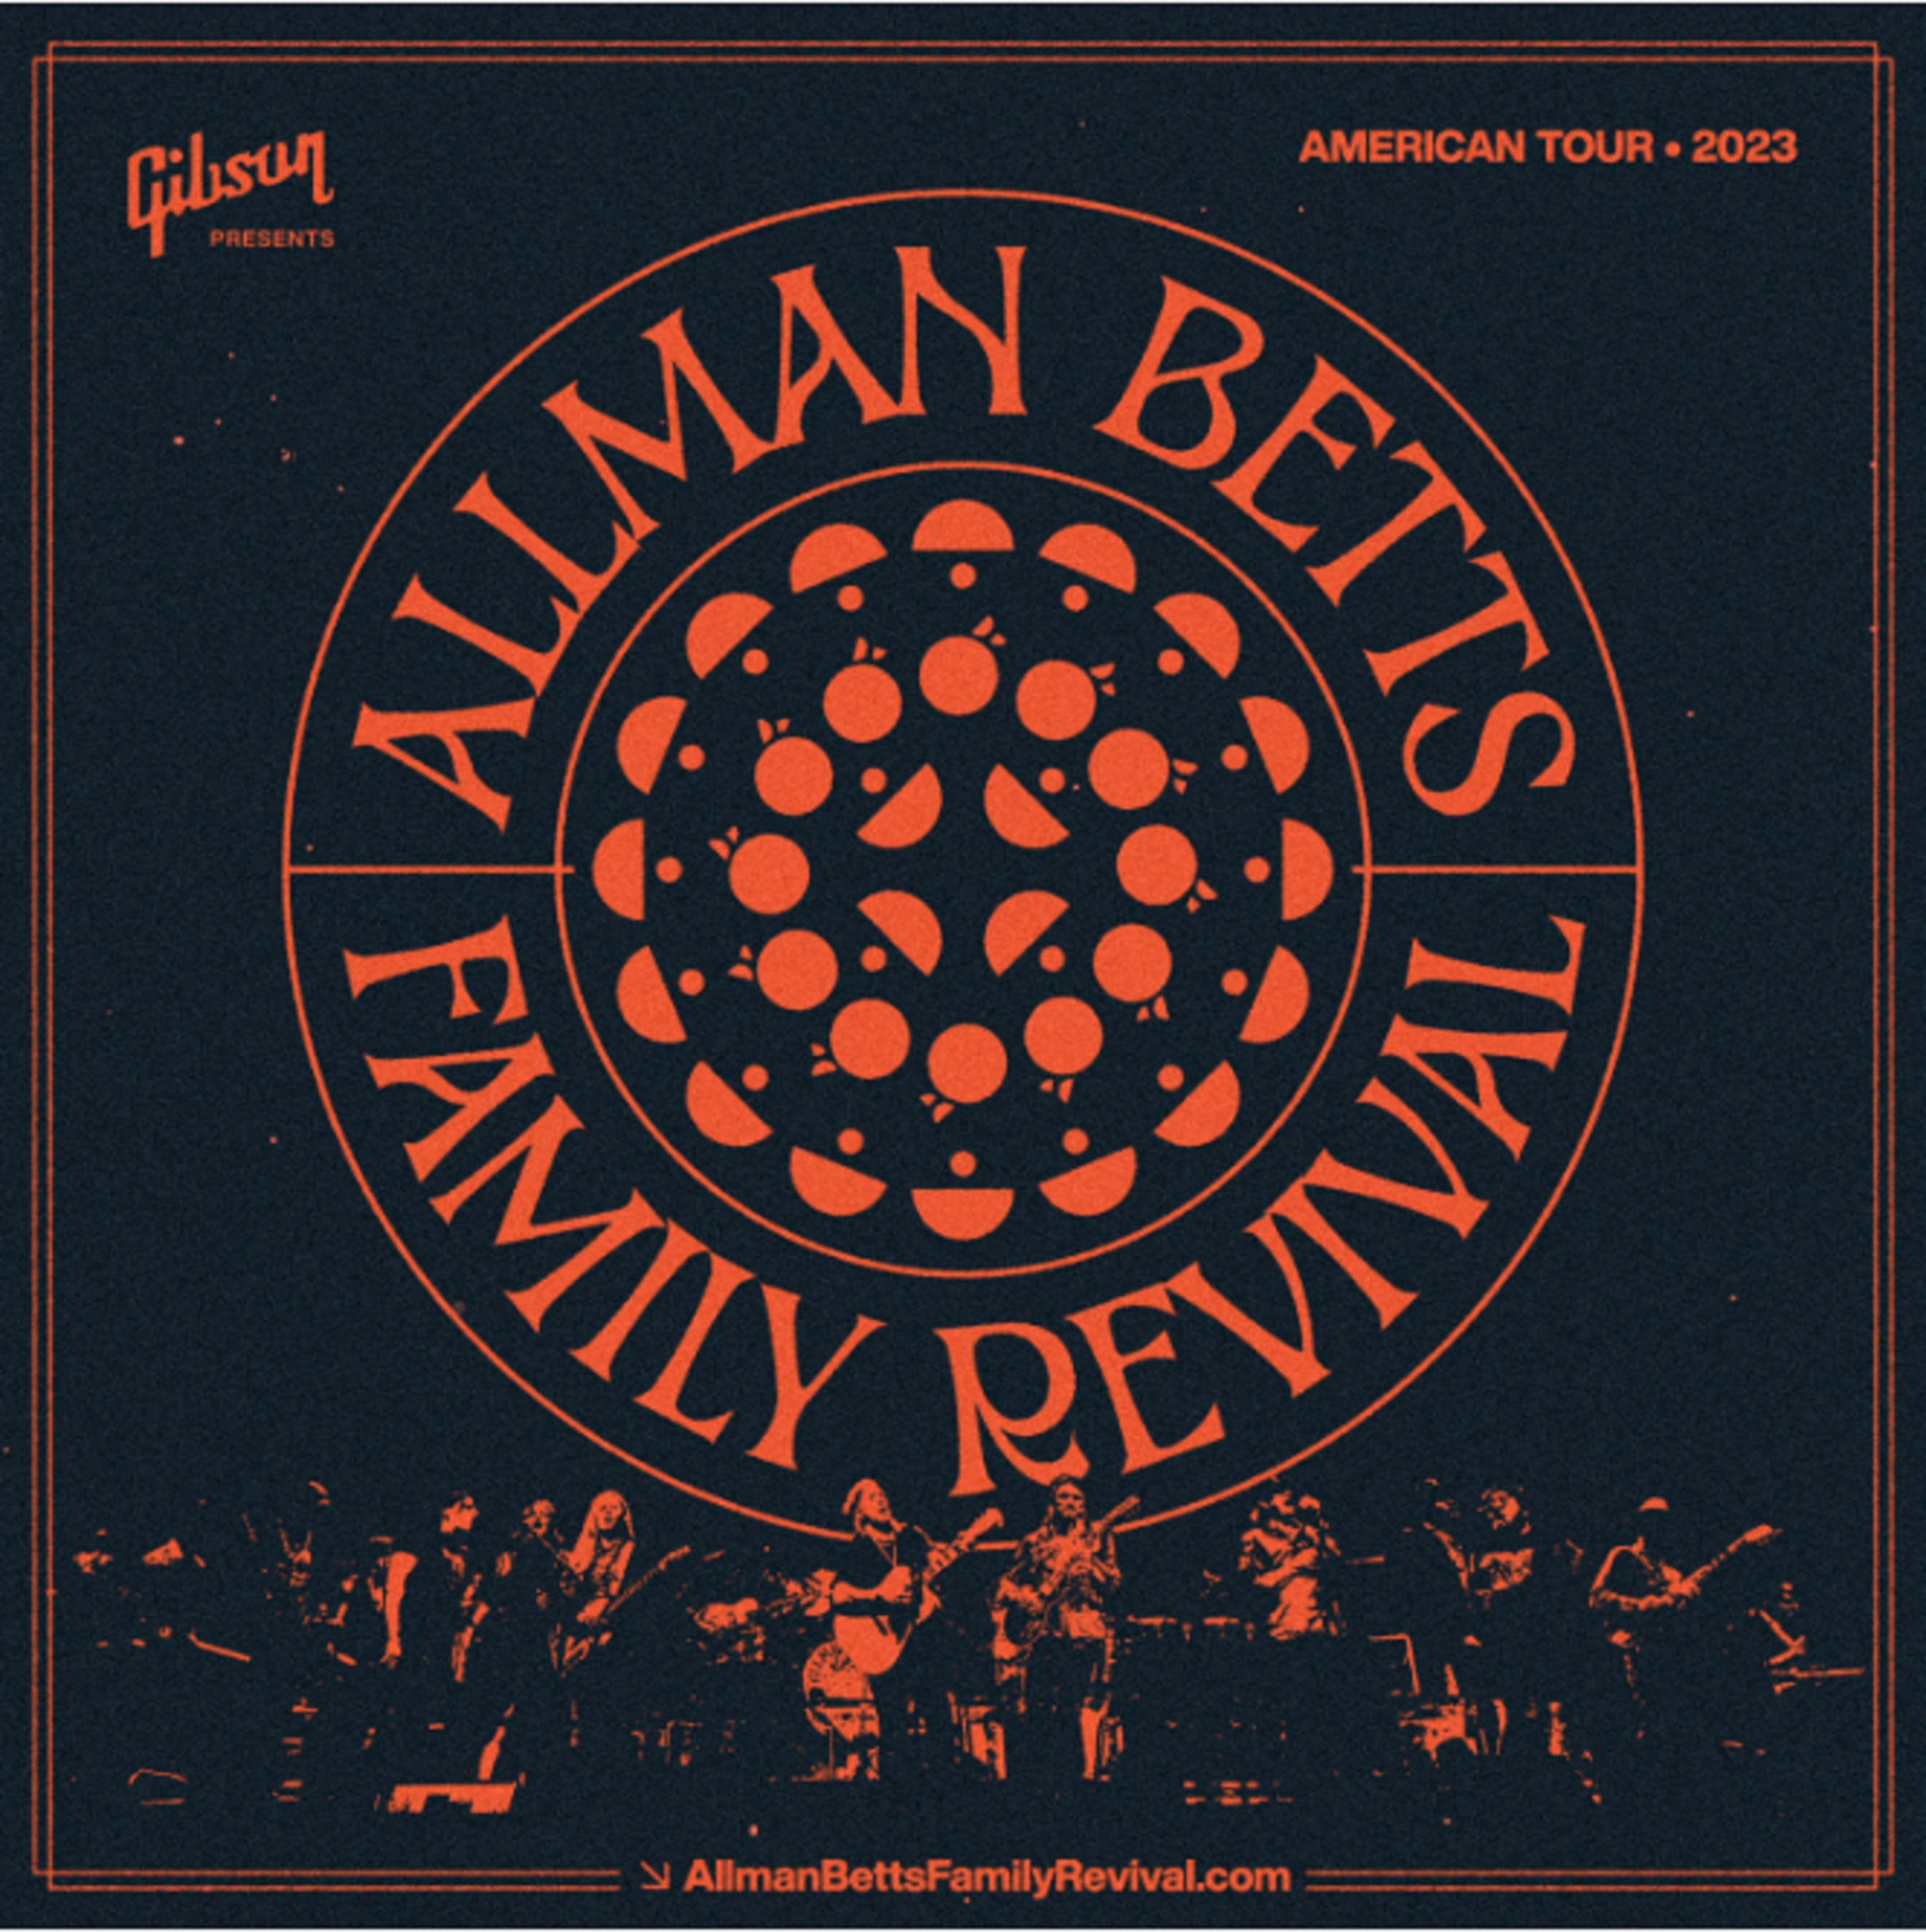 The Allman Betts Family Revival adds special guests to select dates; Tour kicks off Nov 25